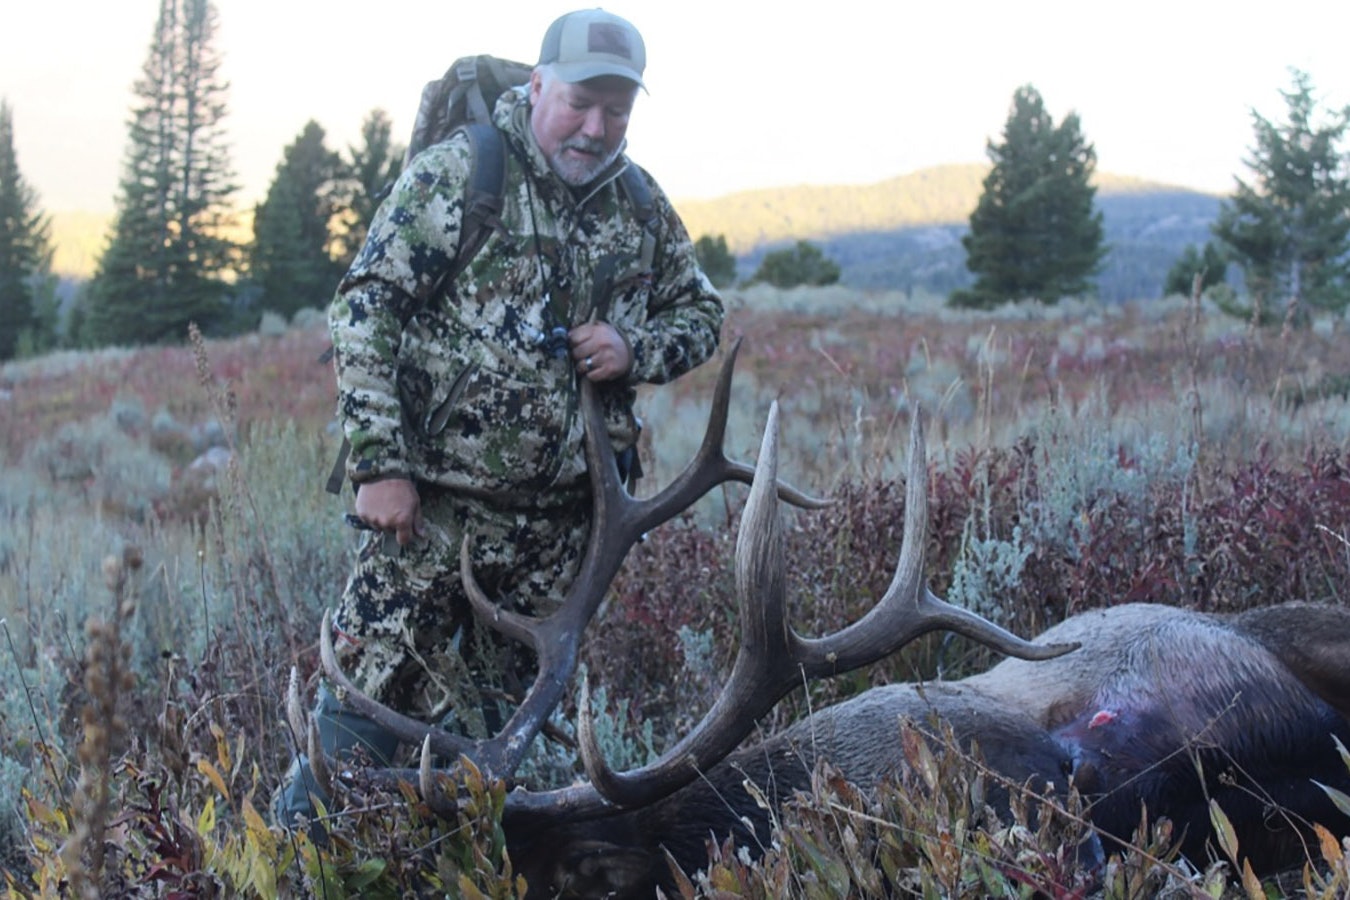 Ed Epperson of Cody bagged this massive bull elk, his first archery bull, with the help of his son, Dalton.